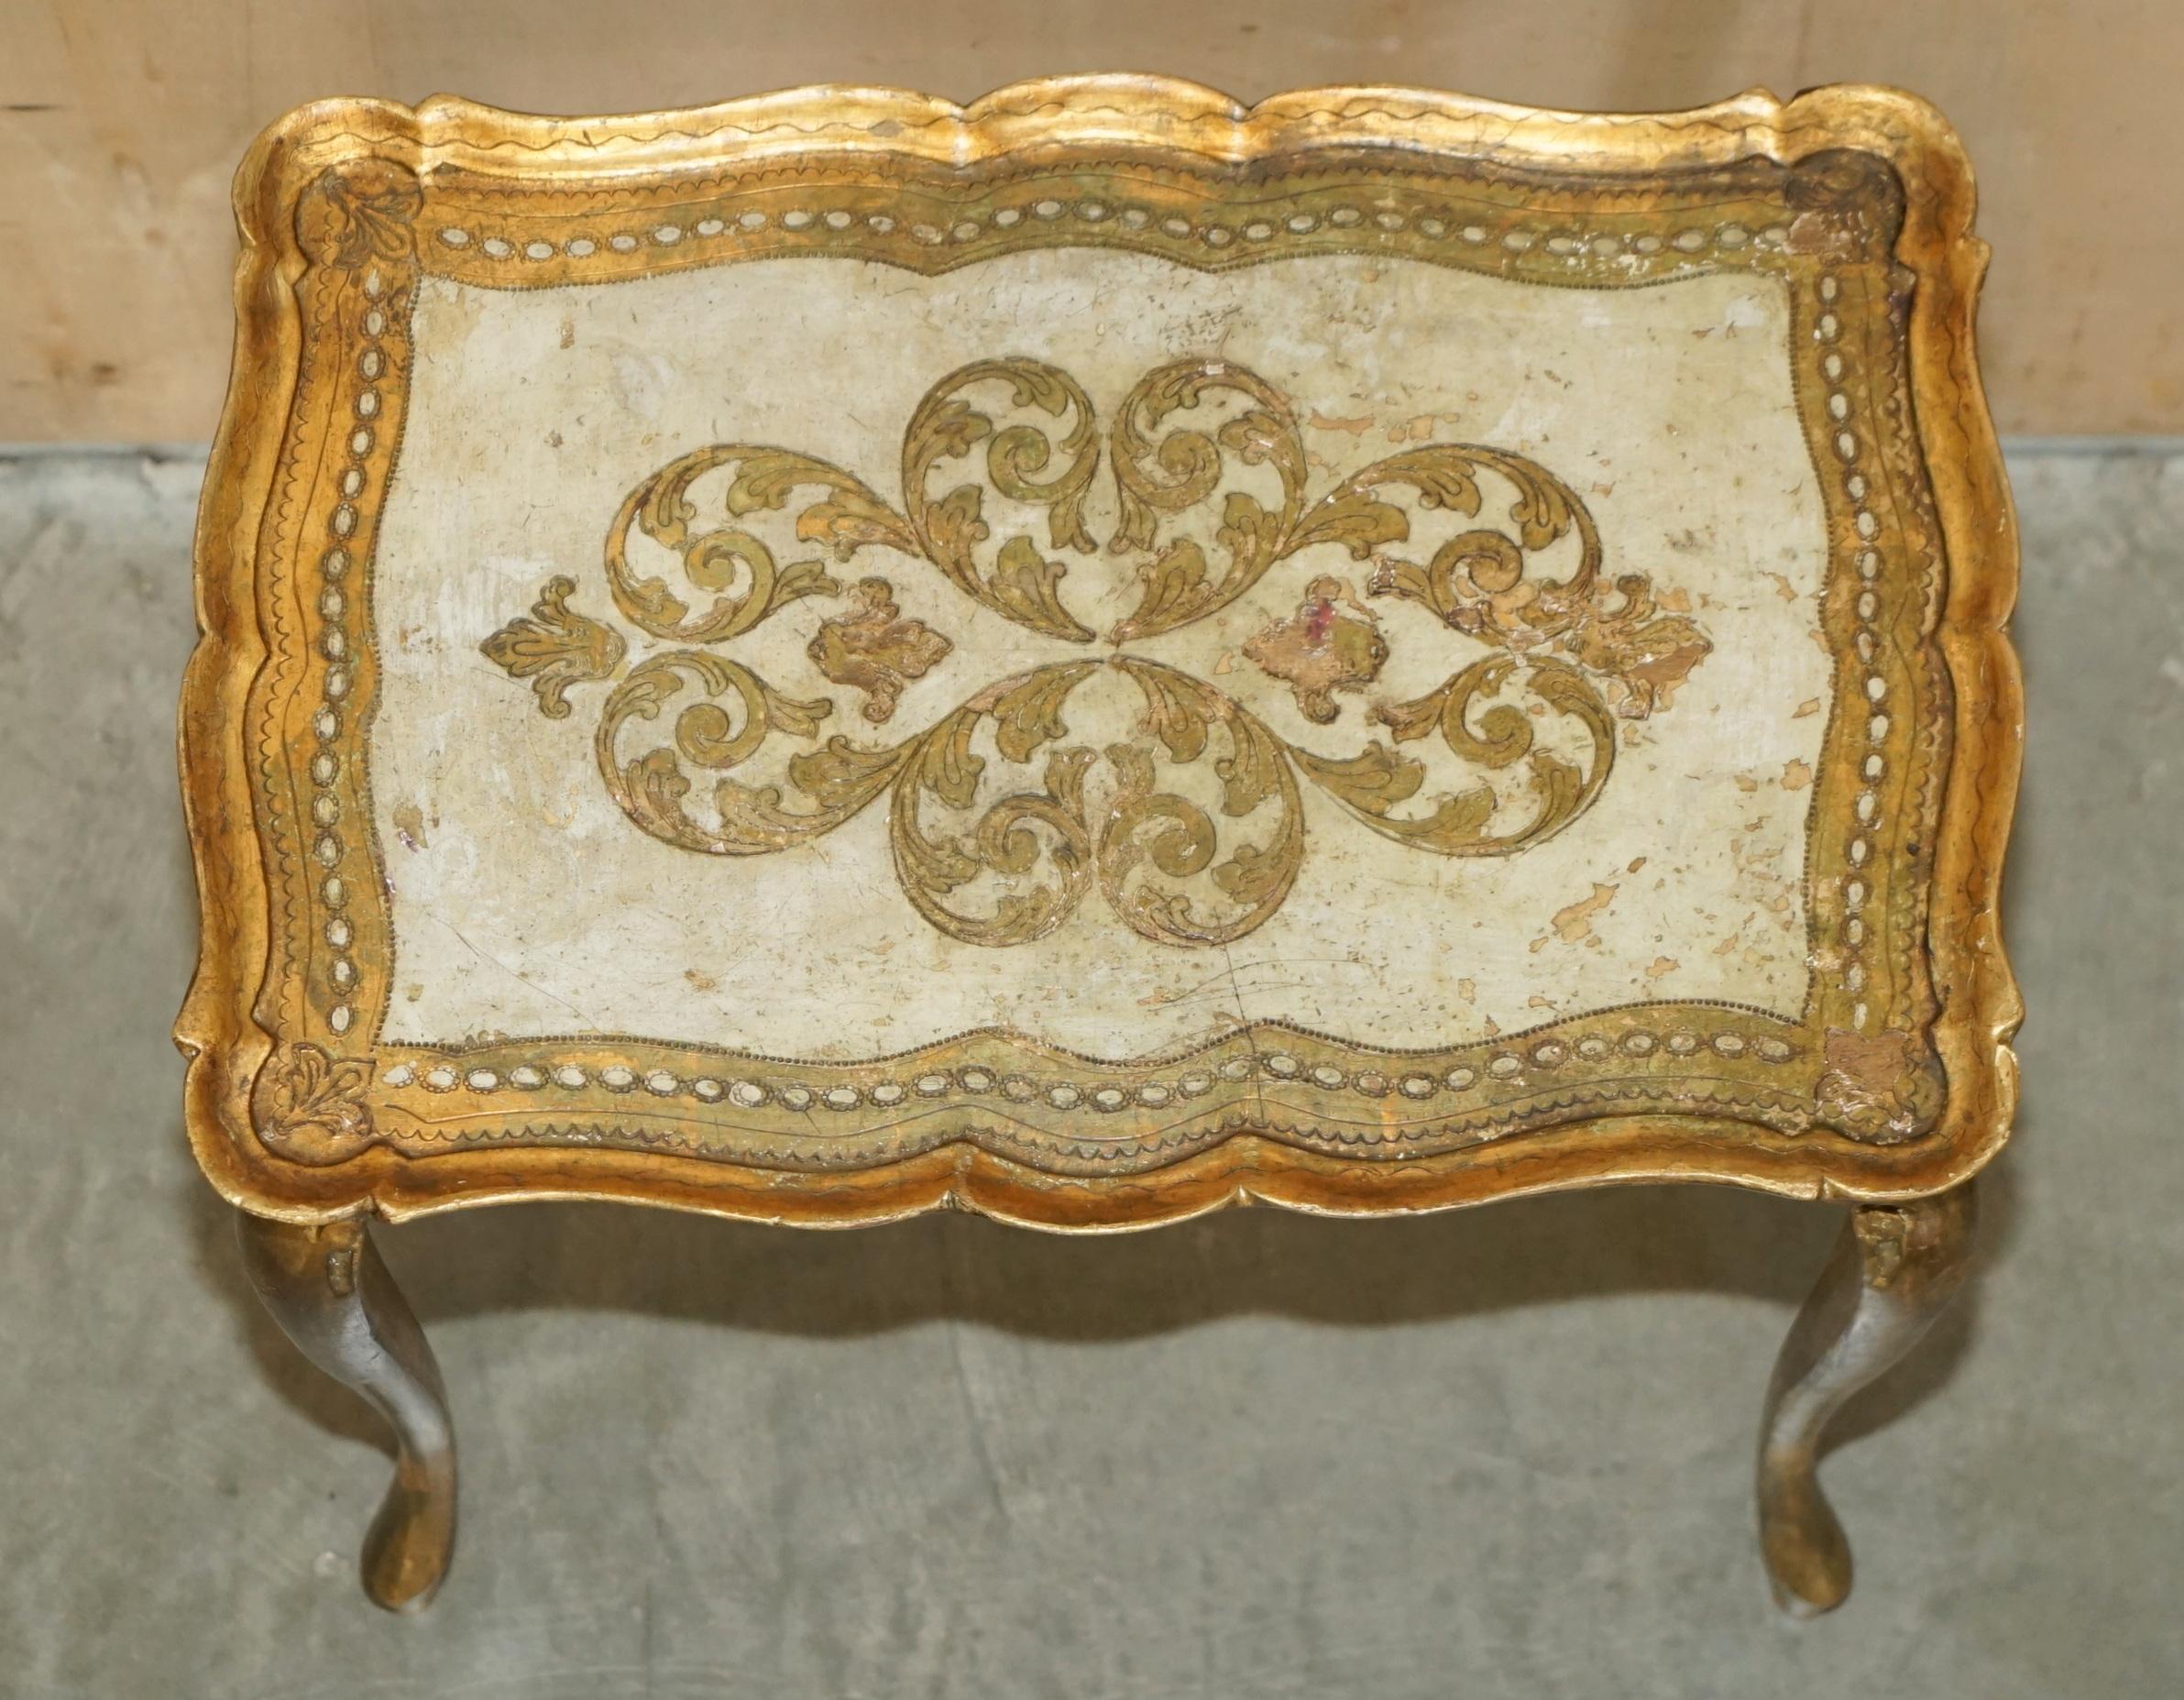 ANTIQUE CIRCA 1930 FLORENTINE VENETIAN HAND PAiNTED & GILT NEST OF THREE TABLES For Sale 3